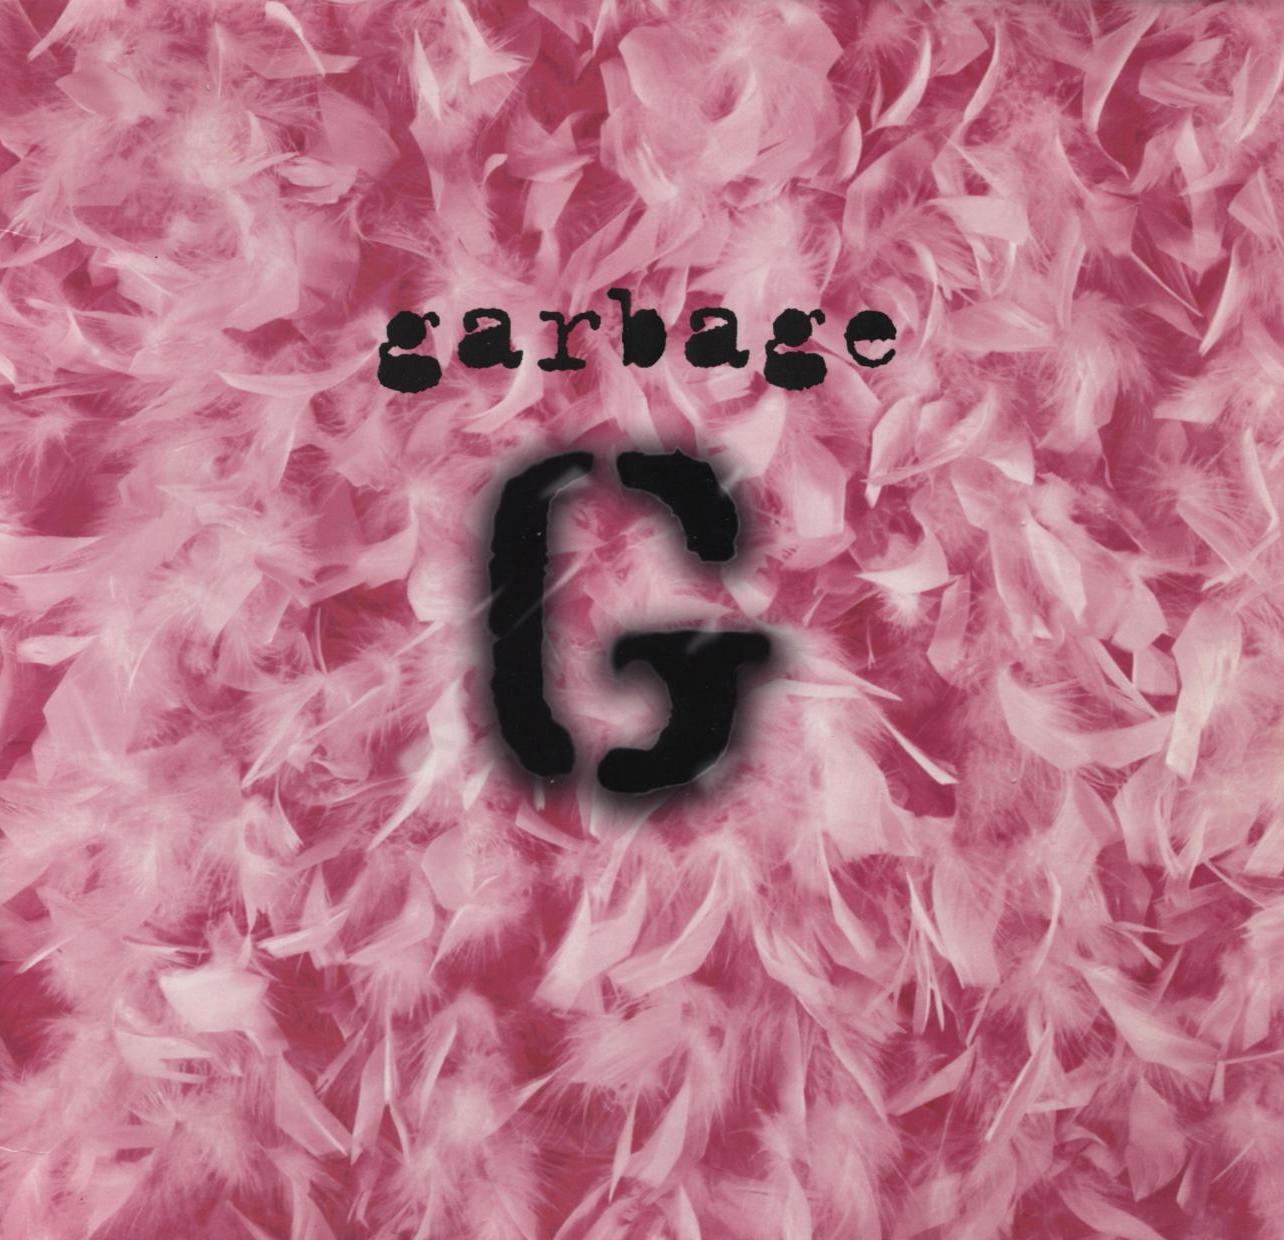 Garbage 1995 The Hi Fi Celluloid Monster